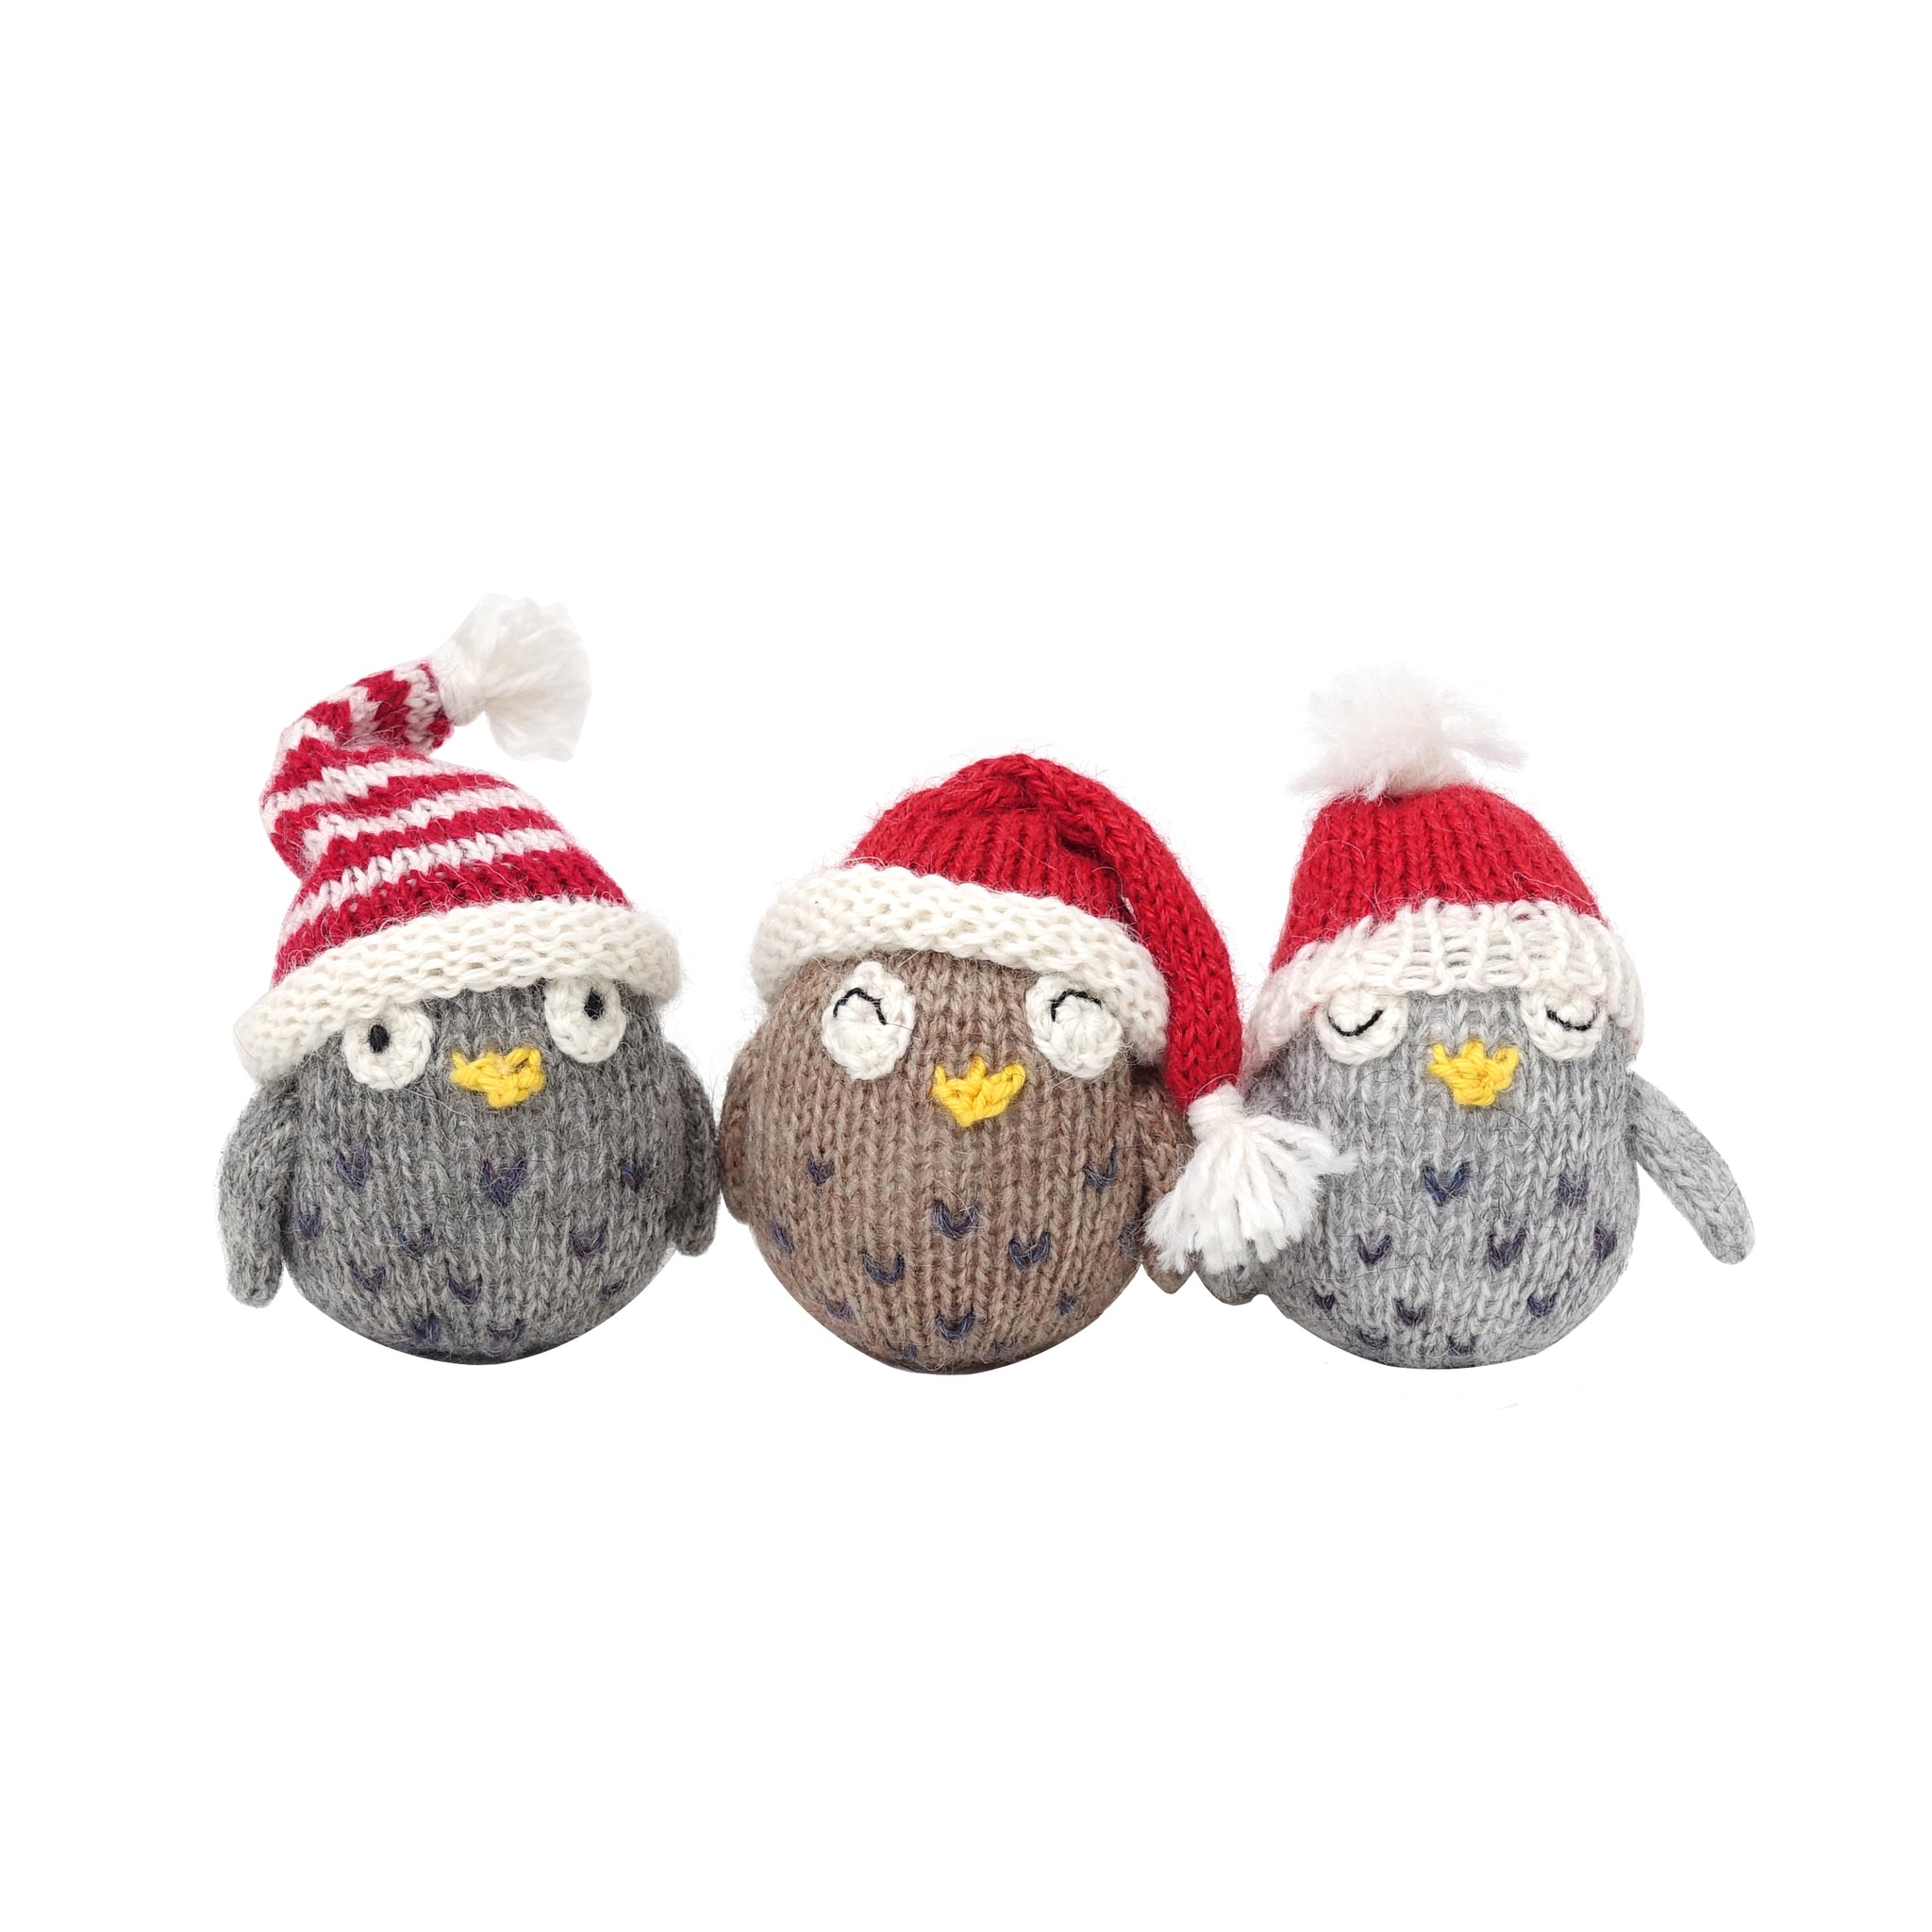 Owls with Hats Ornament- set of 3